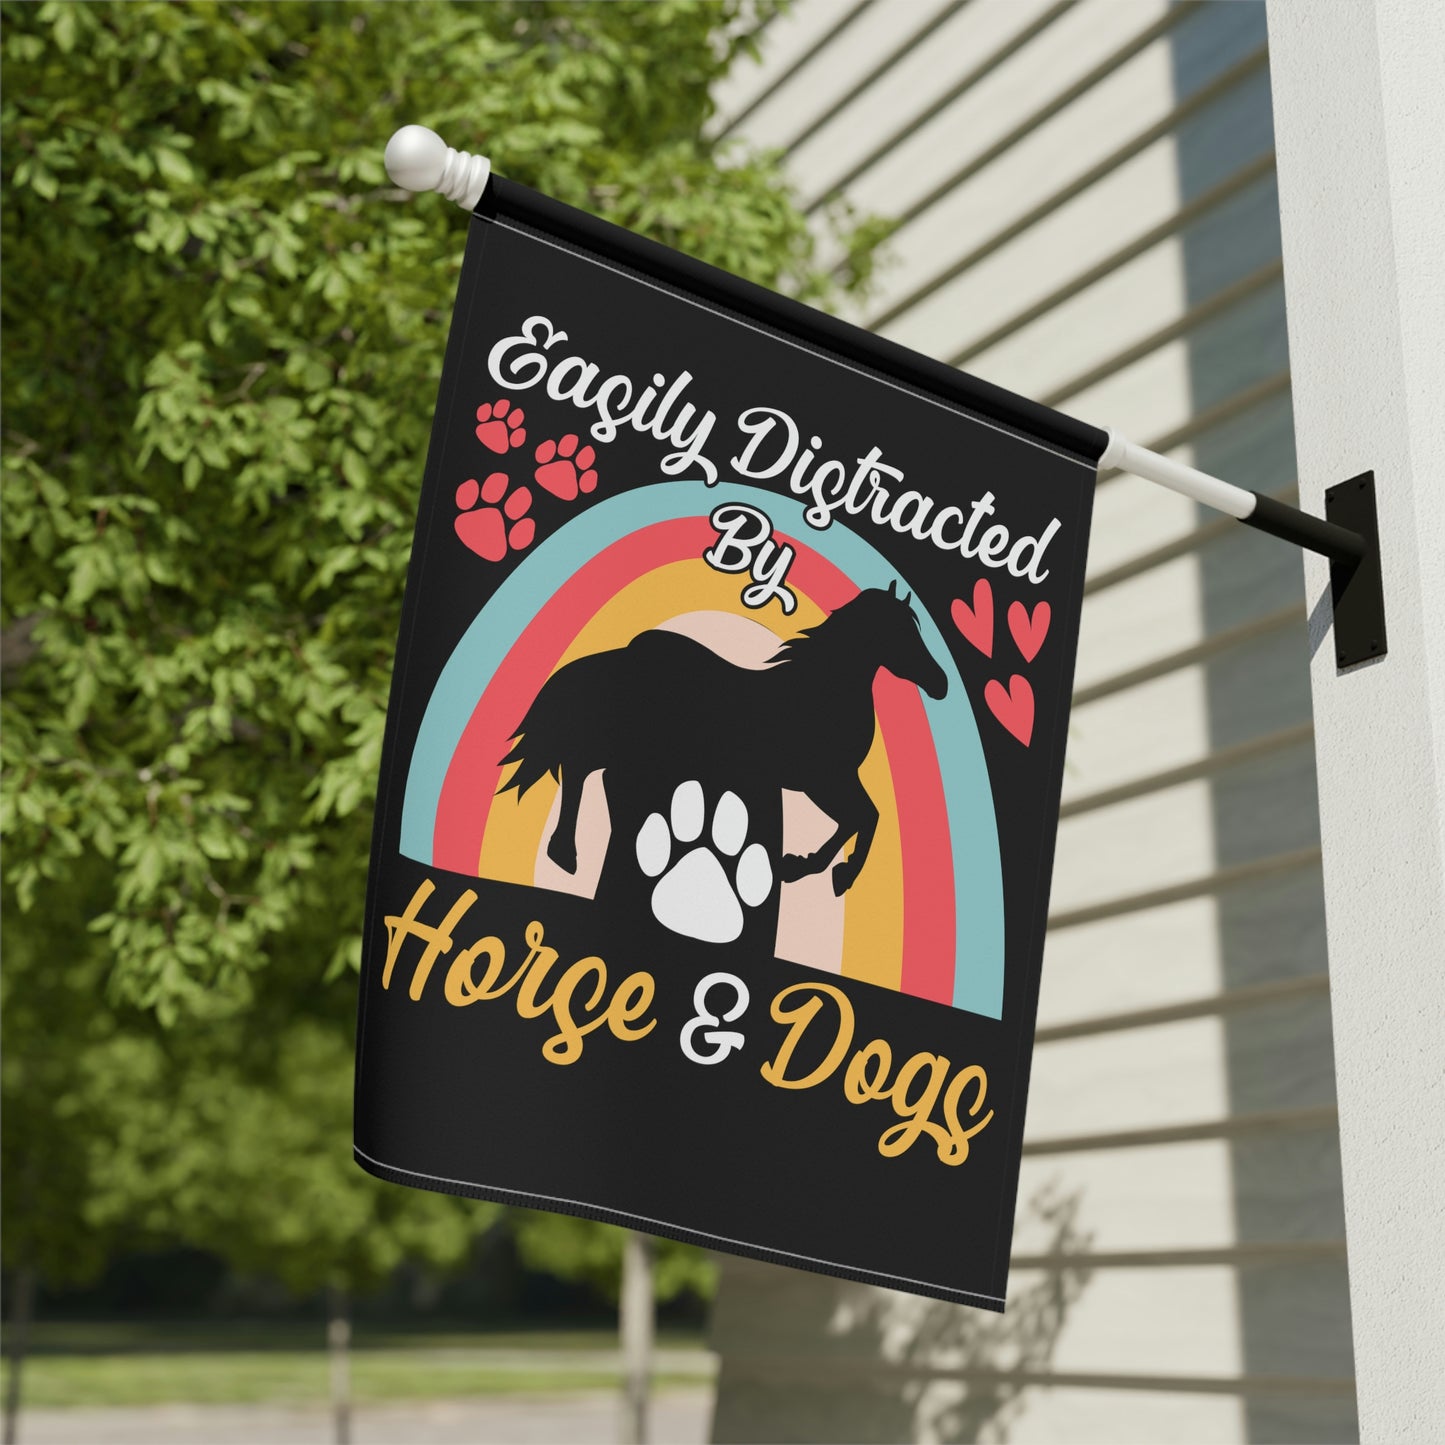 Easily Distracted by Horse and Dogs Garden & House Banner